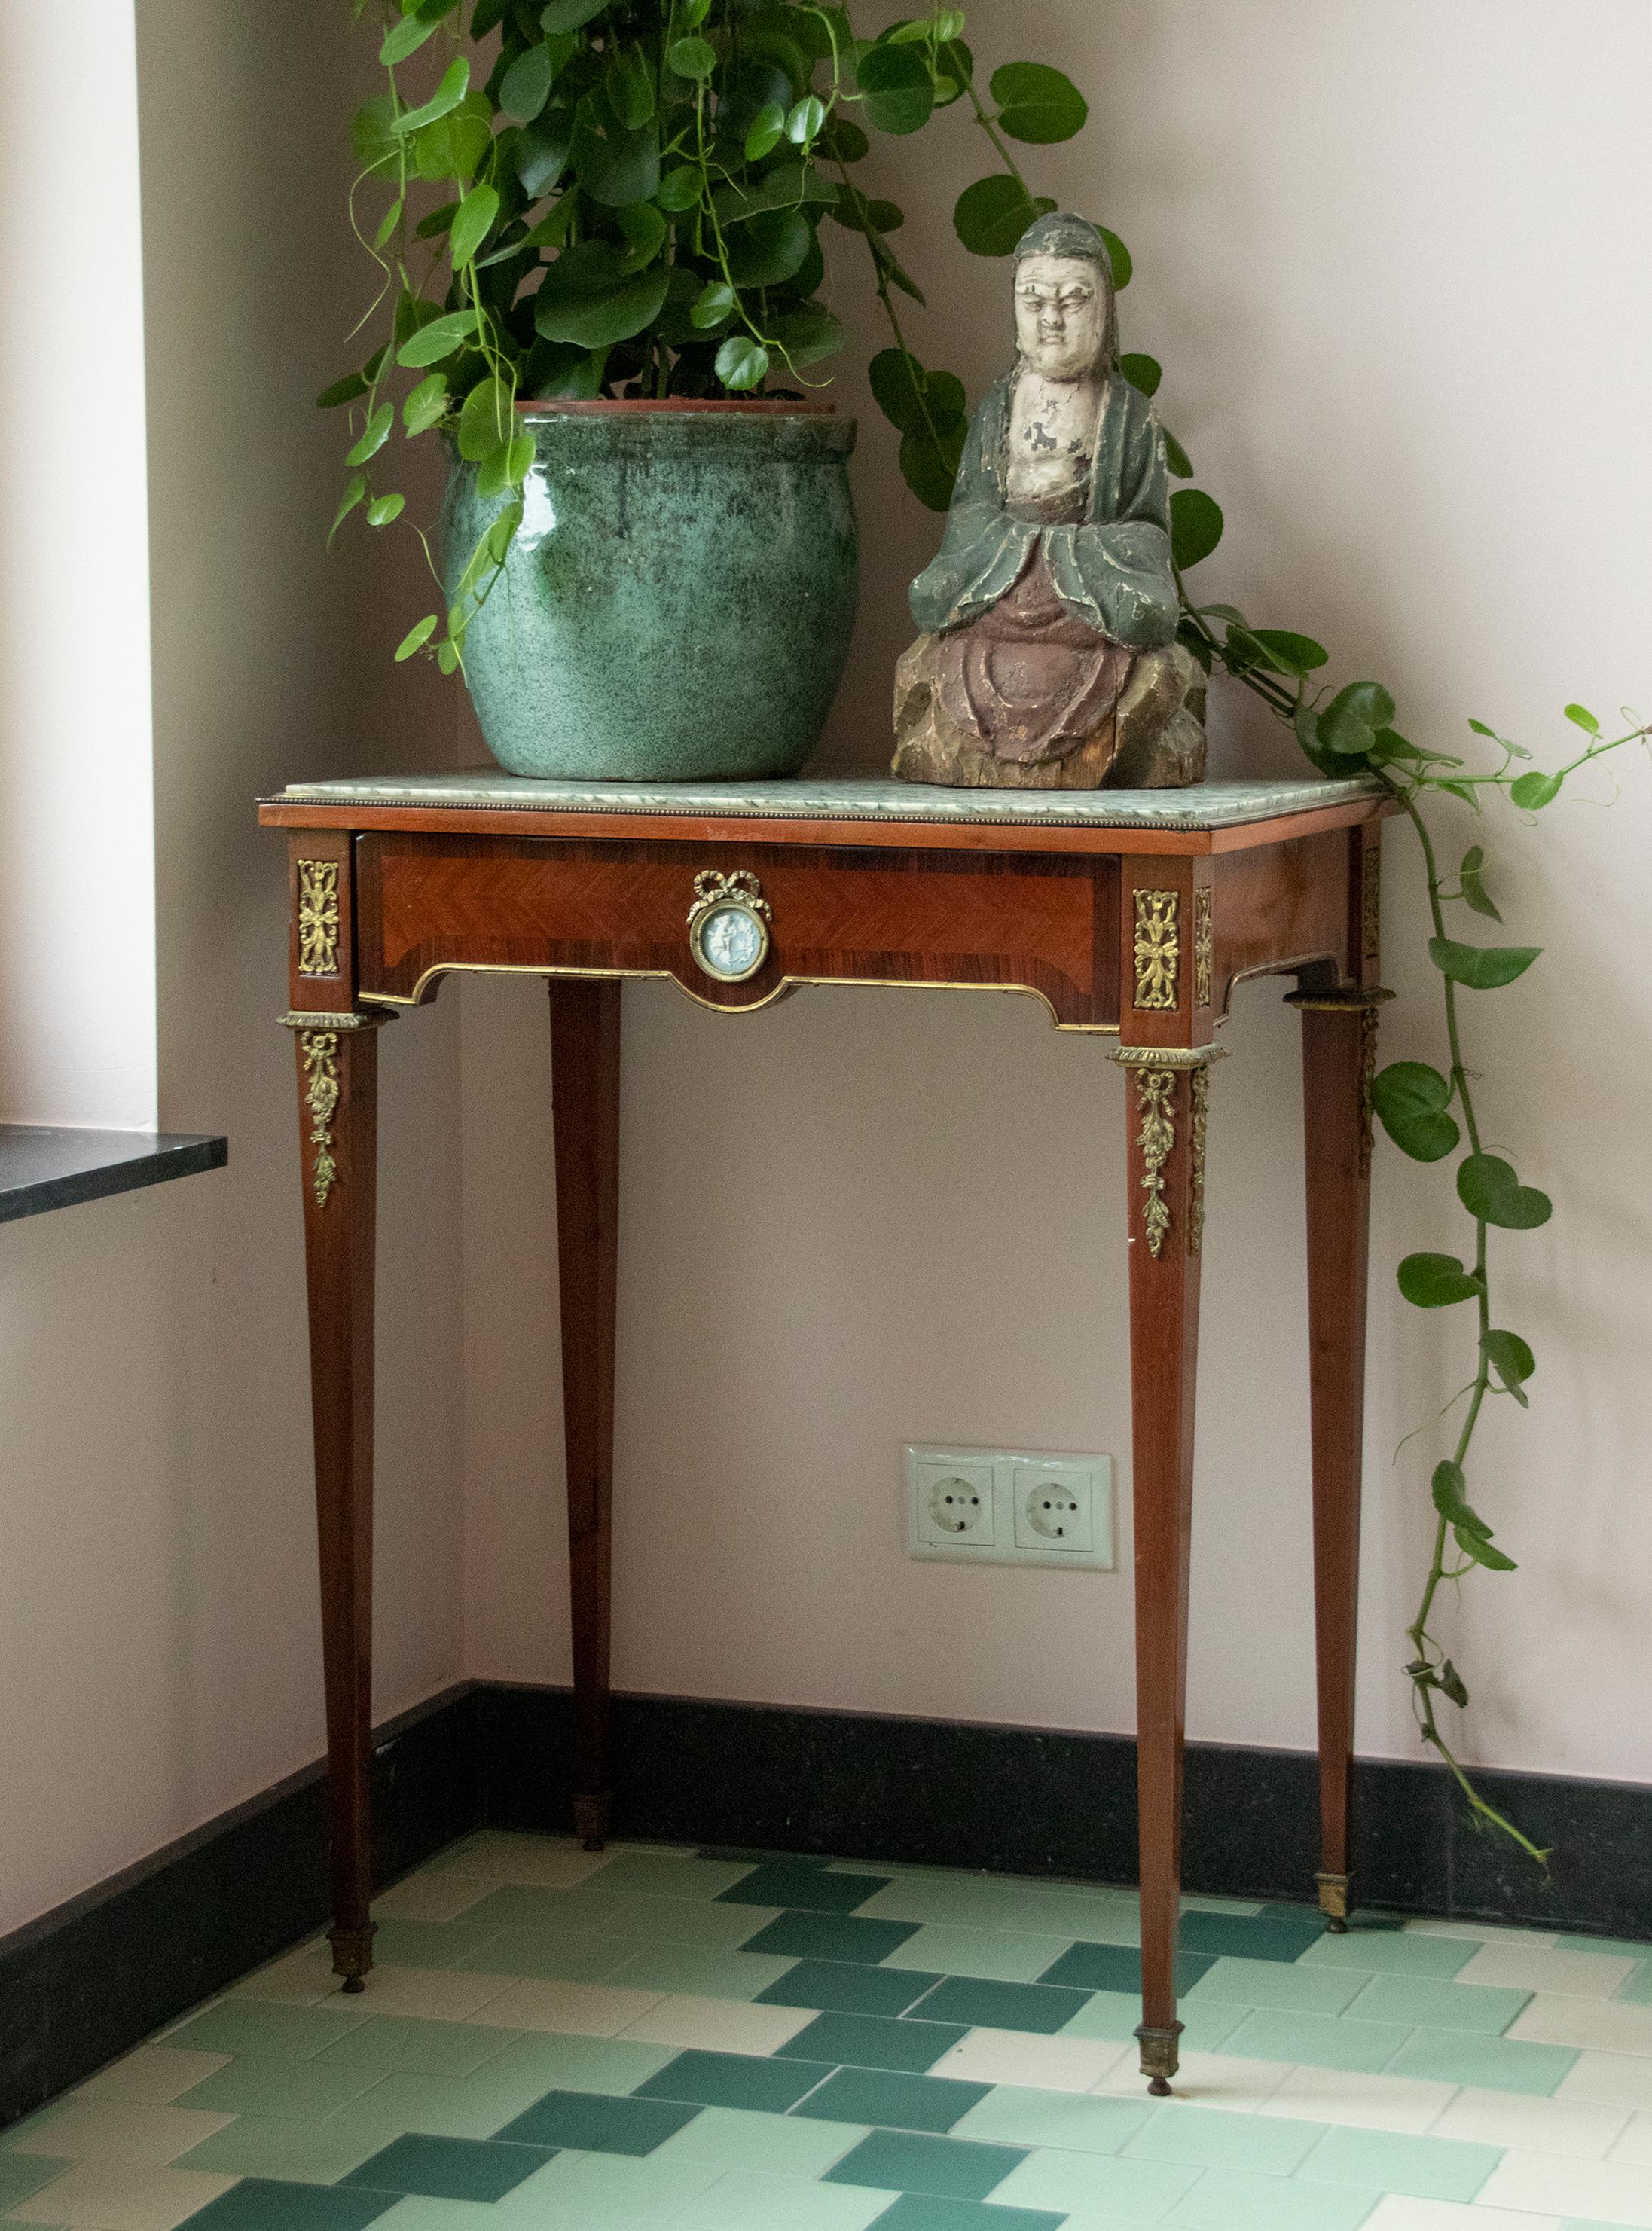 Beautiful antique side table from the French Napoleon 3 period in Louis XVI-style. The table has an elegant design with rosewood inlay on mahogany. The marble top is 'Marbre Vert d'Estours', a light marble with green veins. The table is further